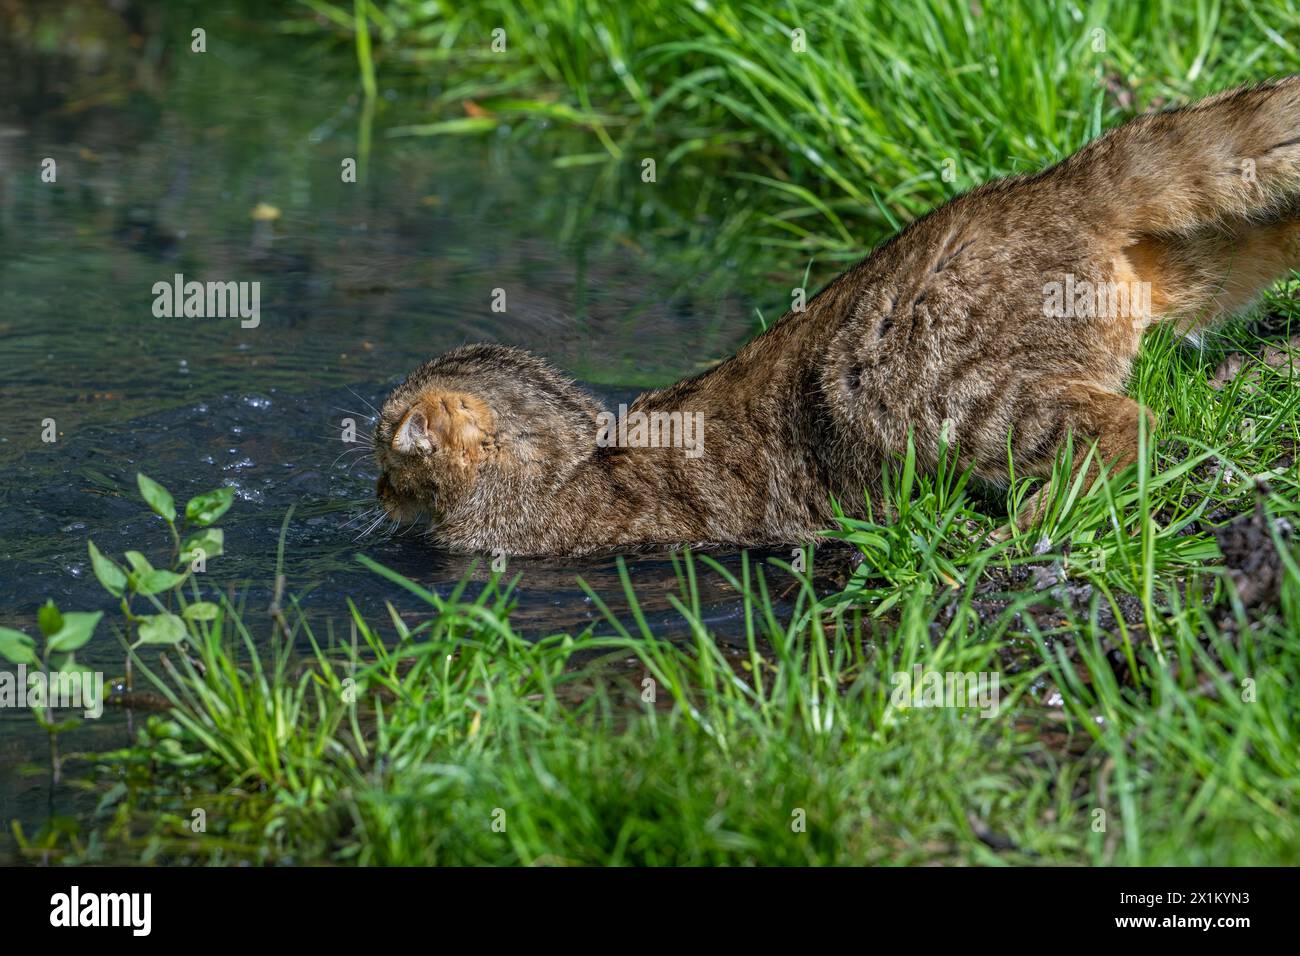 Hunting European wildcat / wild cat (Felis silvestris silvestris) jumping in water of pond to catch fish / frog Stock Photo